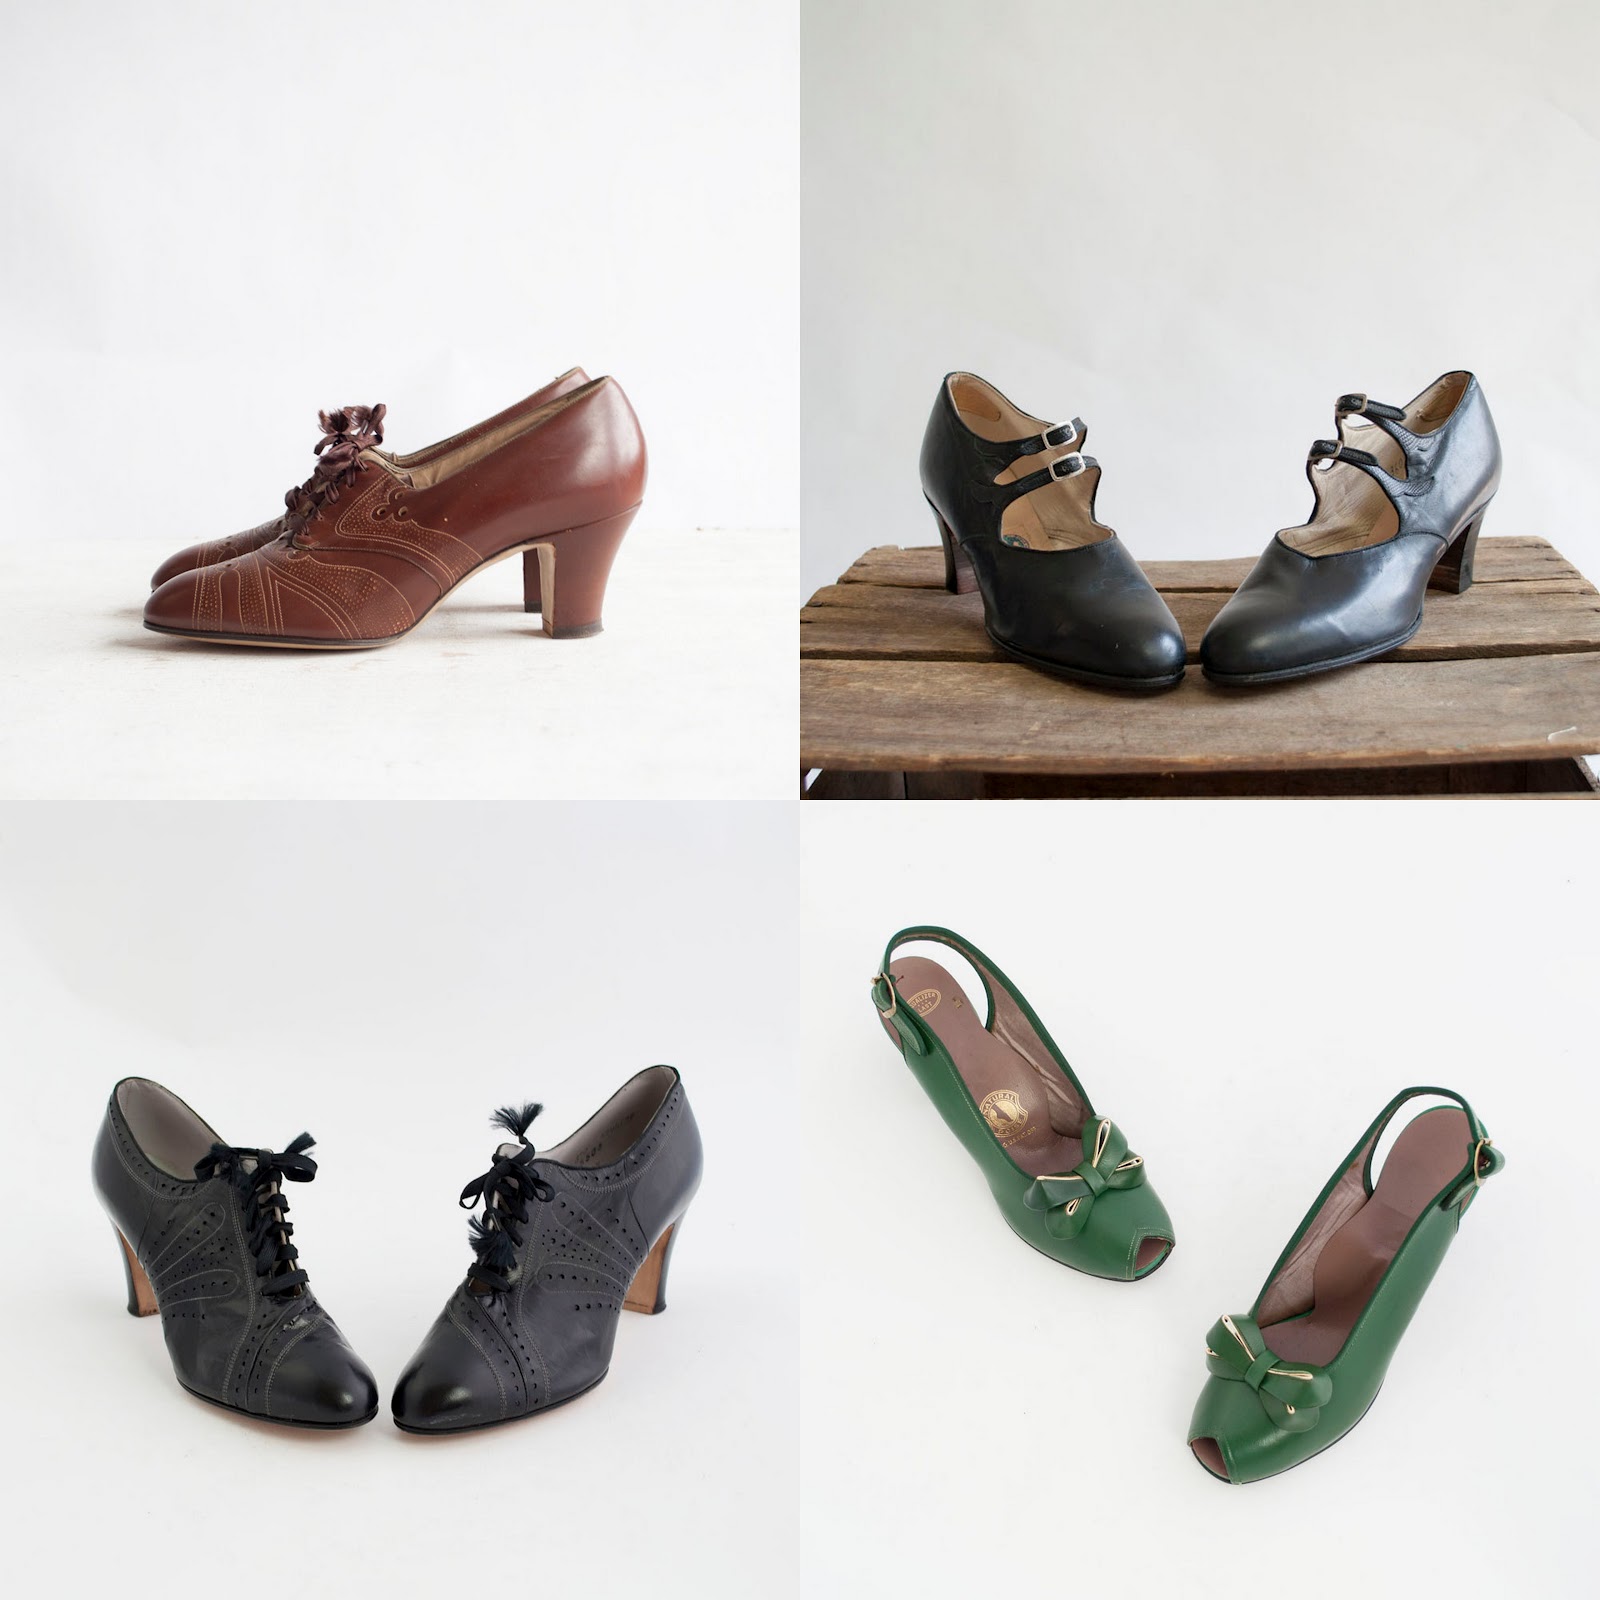 small earth vintage: shoes. glorious shoes.